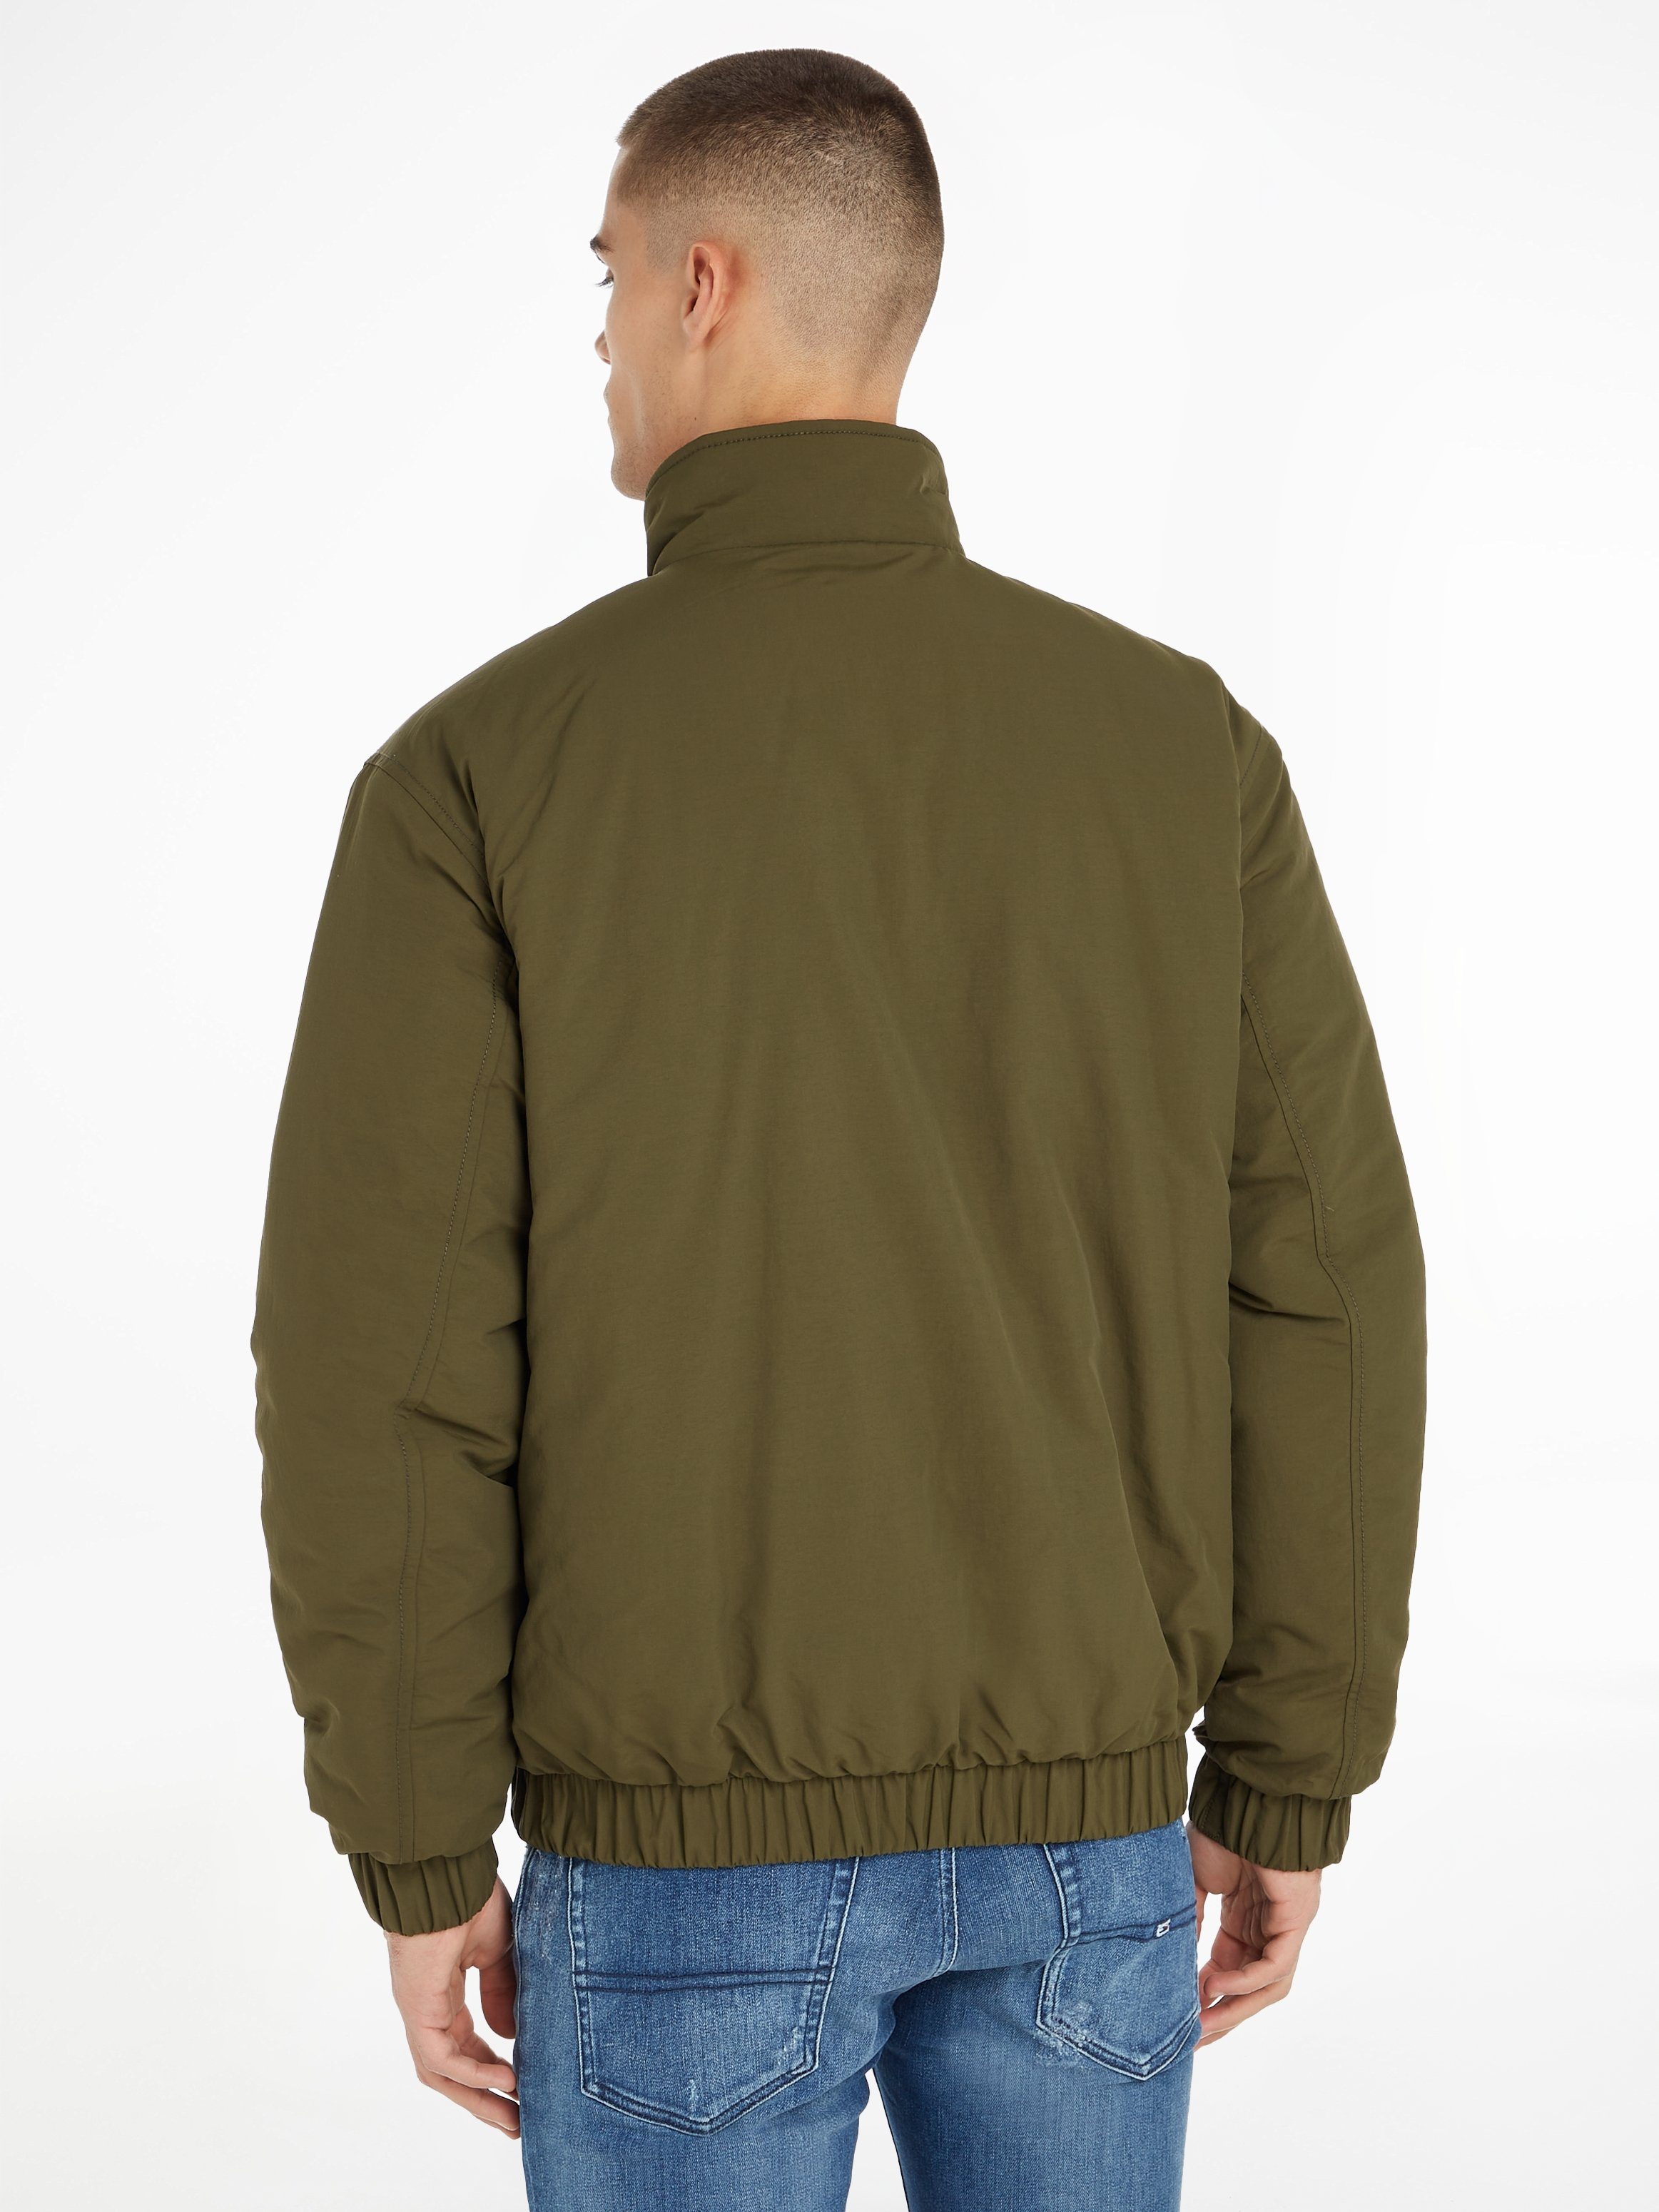 Tommy Jeans Blouson TJM ESSENTIAL PADDED Green Olive JACKET Drab